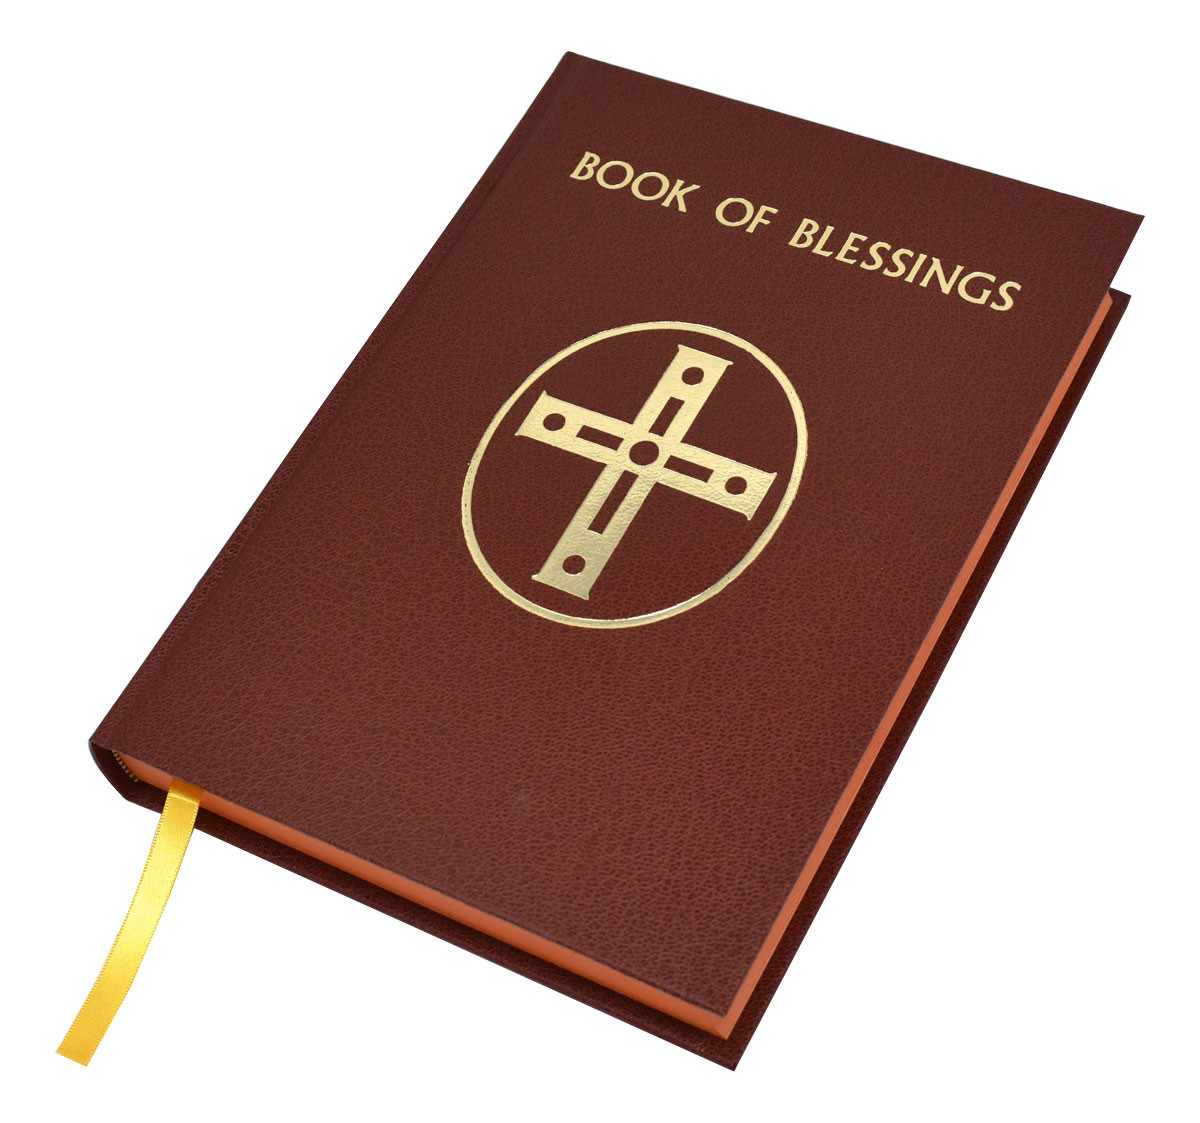 book-of-blessings-st-jude-shop-inc